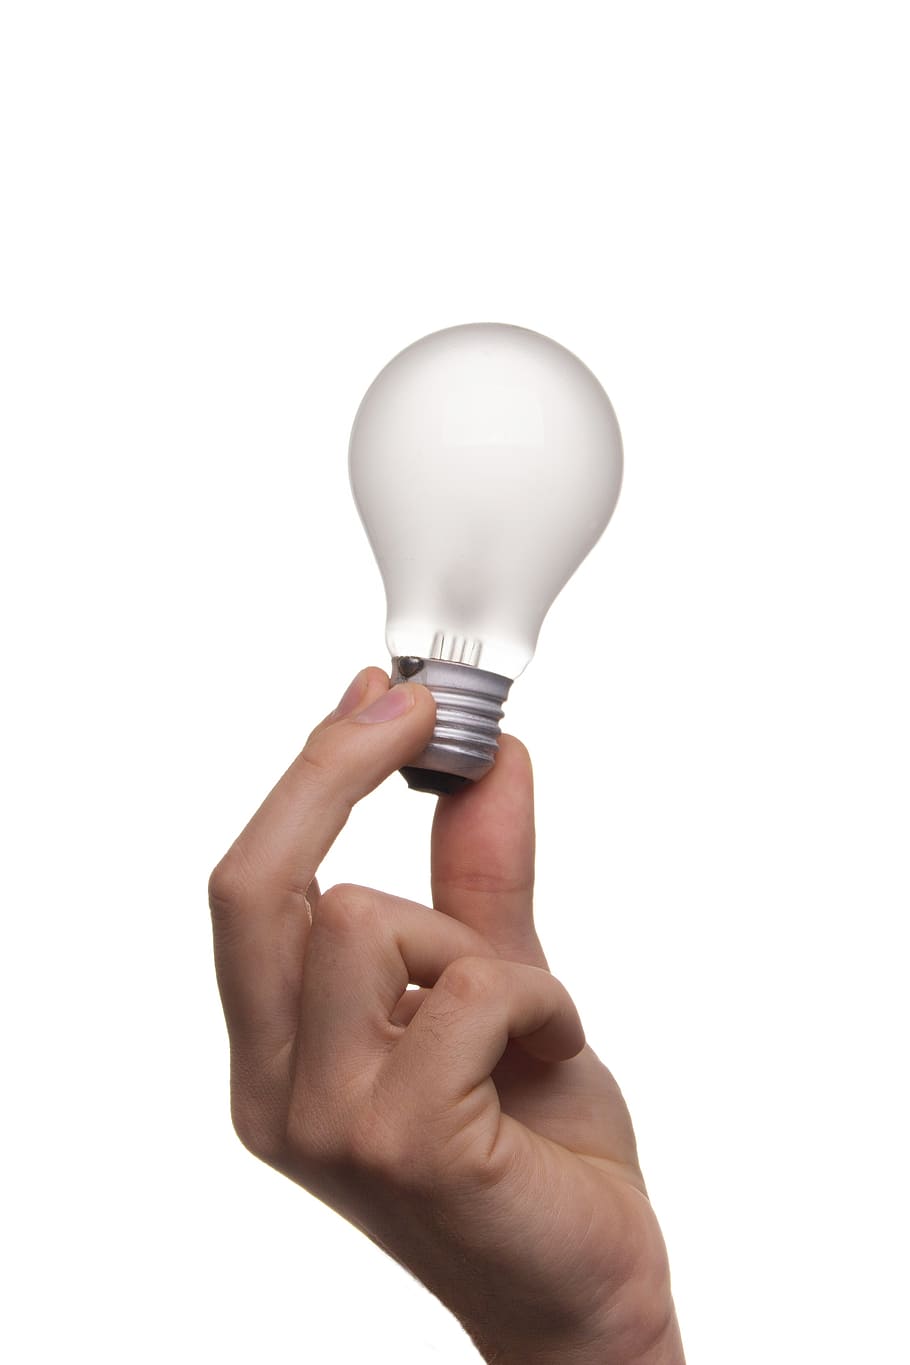 person, holding, white, light bulb, lamp, idea, pear, view, thought, inspiration